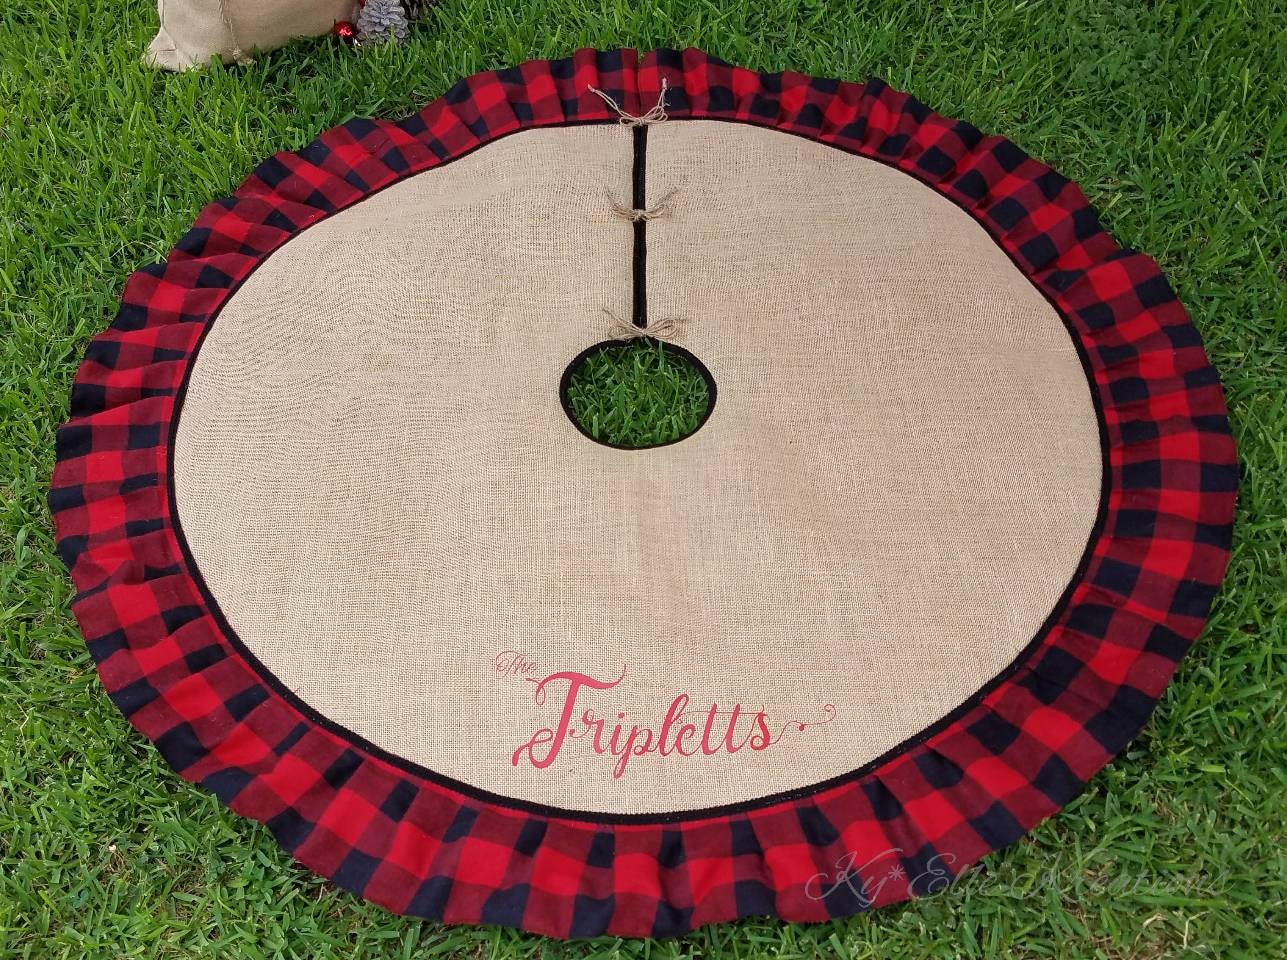 Full diameter view of Red & Black Buffalo Plaid, Burlap Christmas Tree Skirt displayed with personalized family name, The Triplets in red,